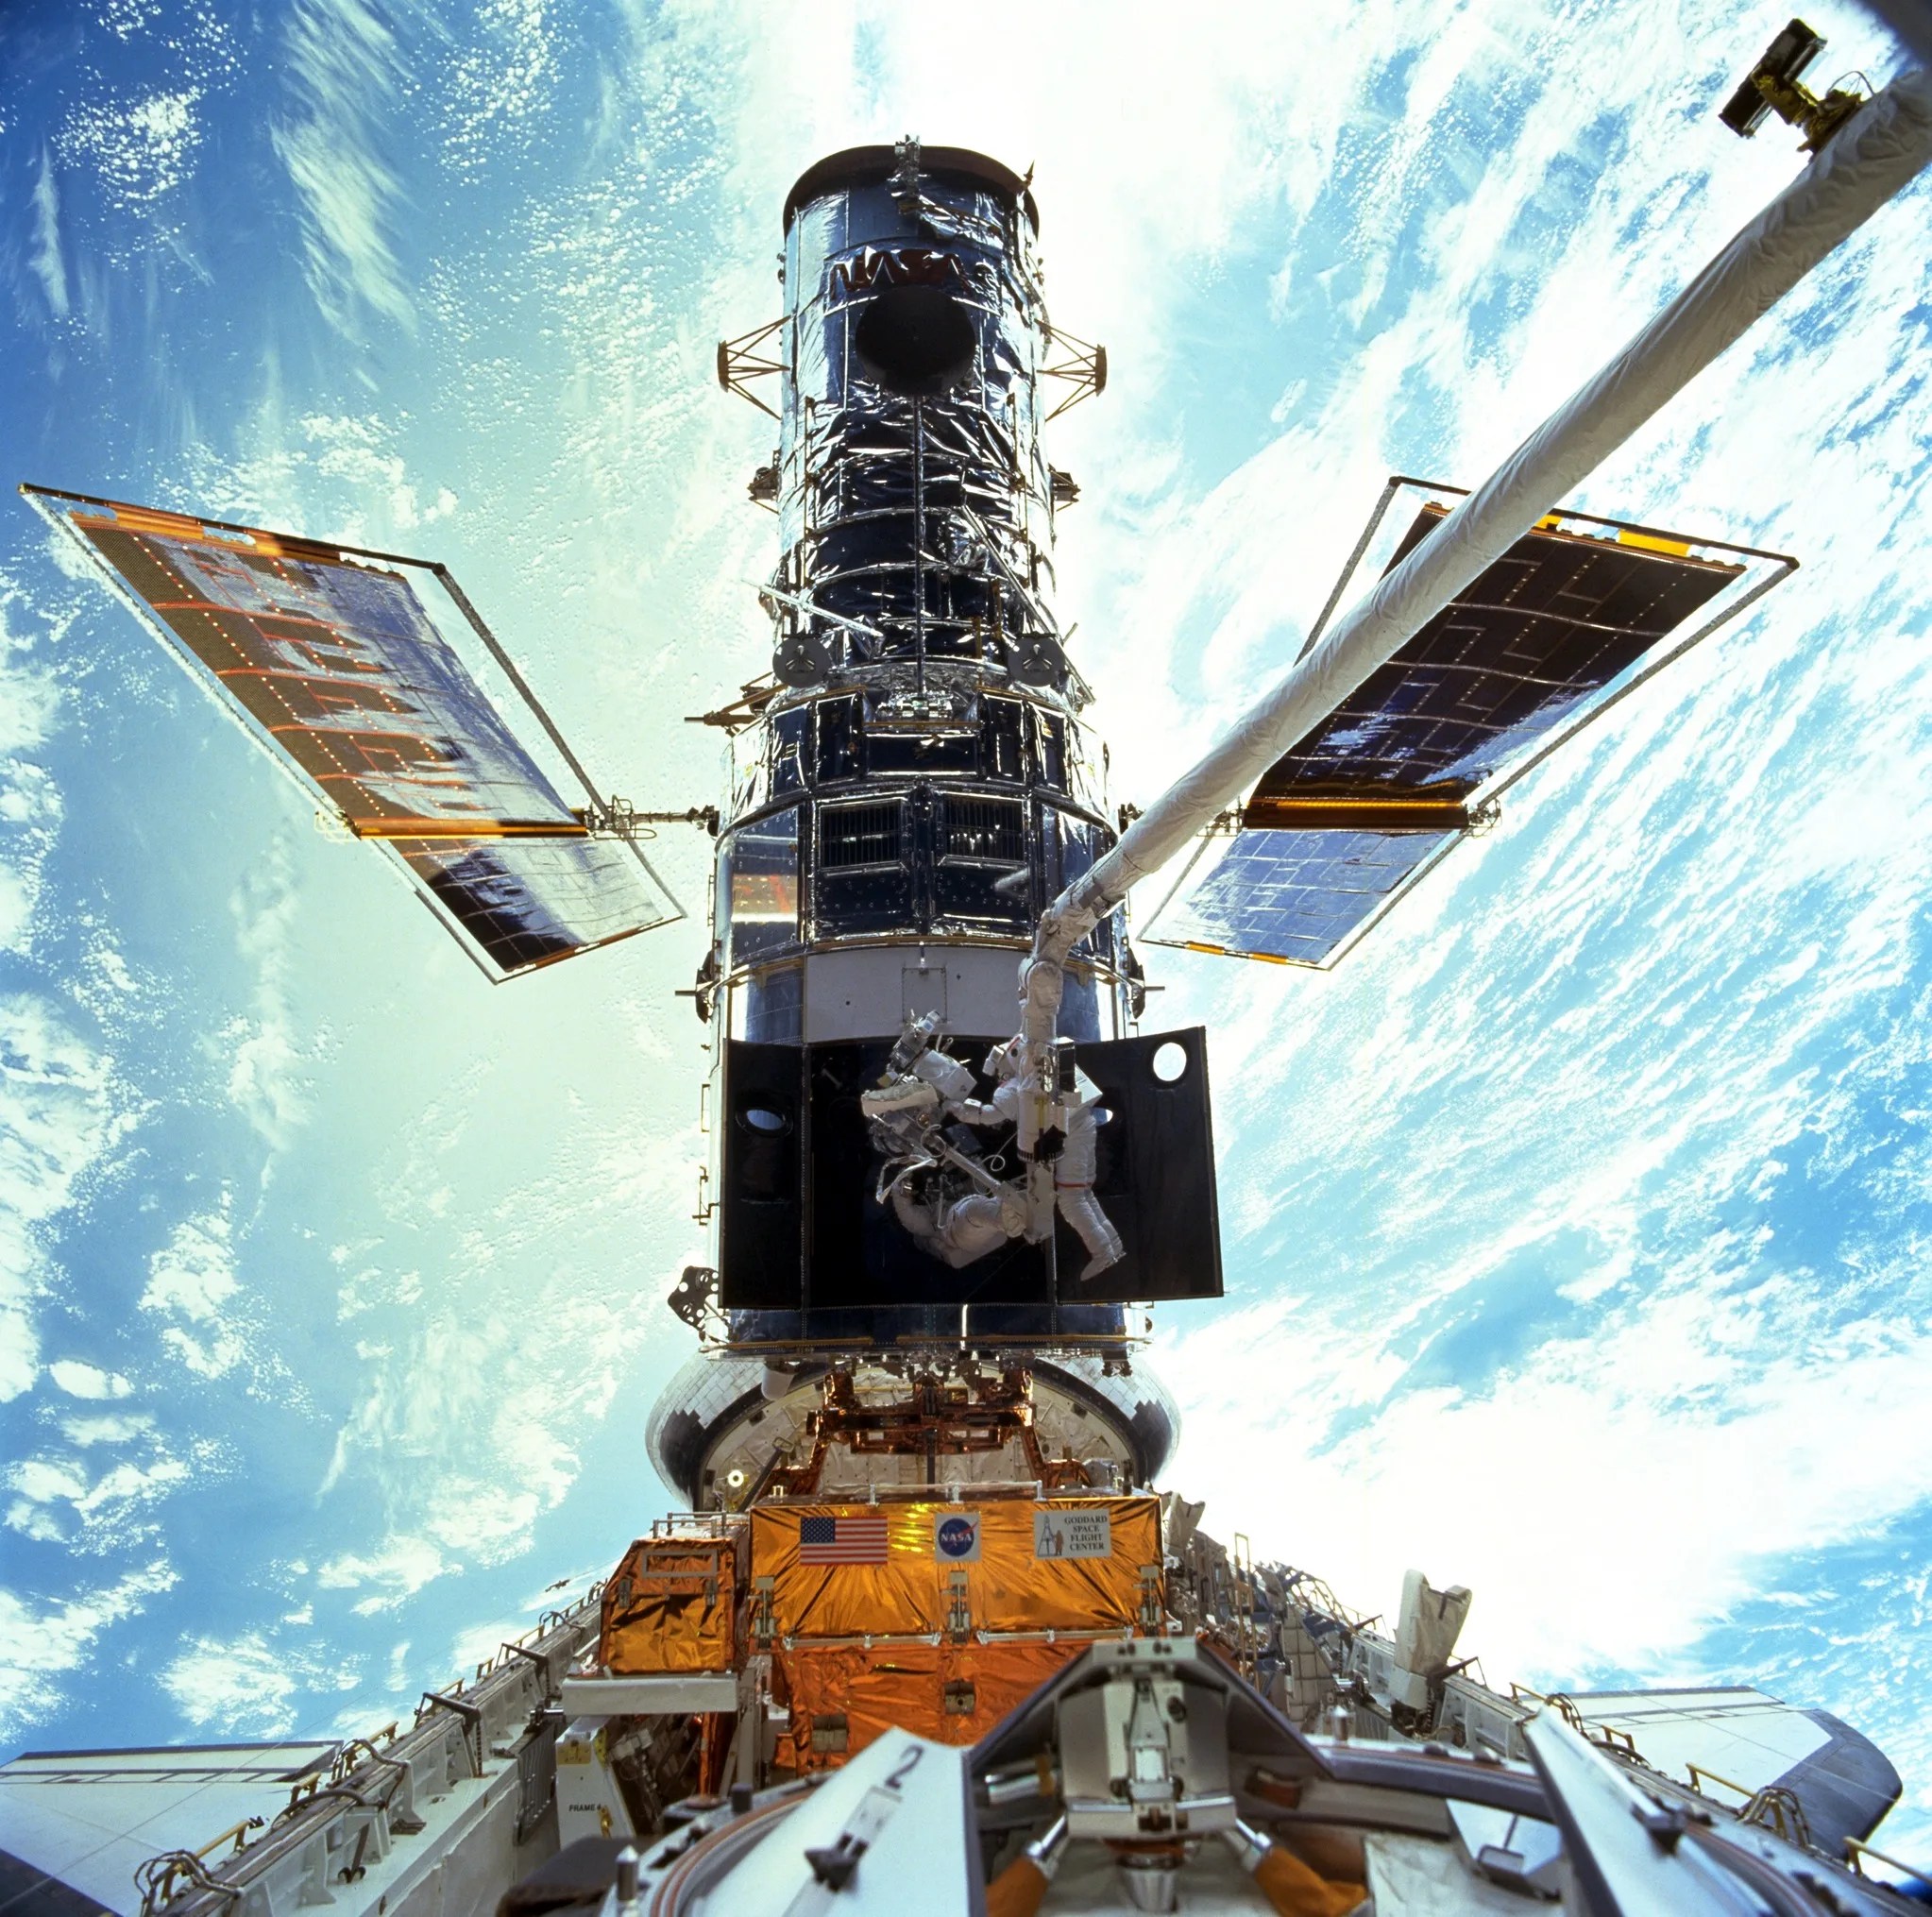 Image of Hubble over Earth, being serviced by astronauts